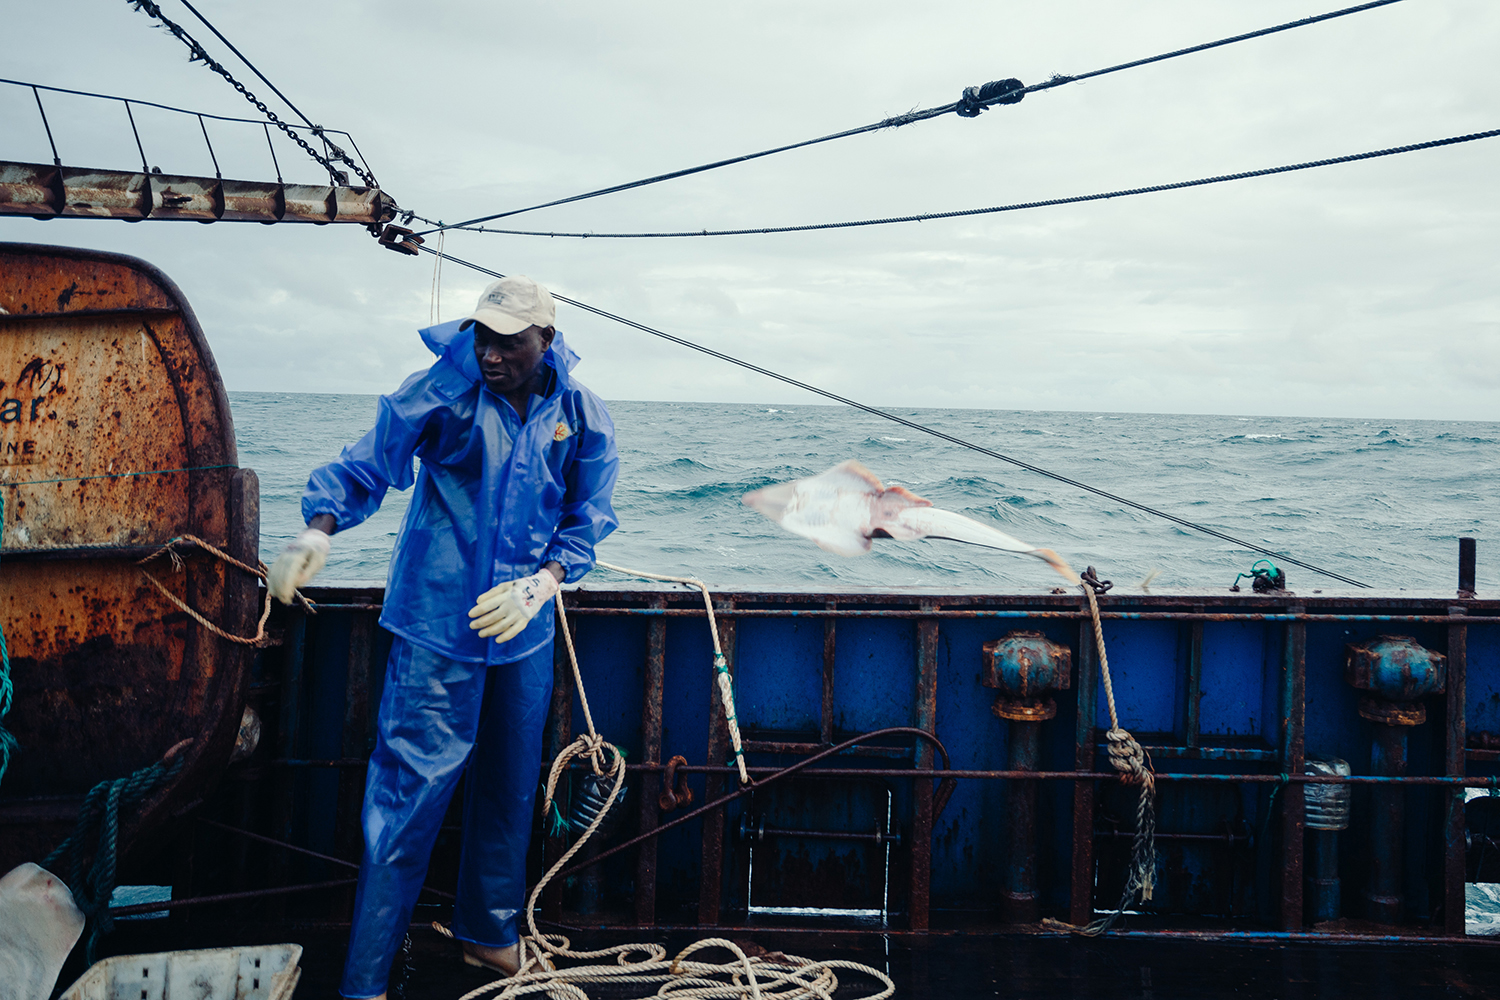 A crewmember throws a guitarfish back into the water to die after cutting its fins, July 22, 2016. The guitarfish is part of the by-catch caught in the trawl net. Its flesh is not considered palatable, but there is demand for its fins in Chinese markets. 